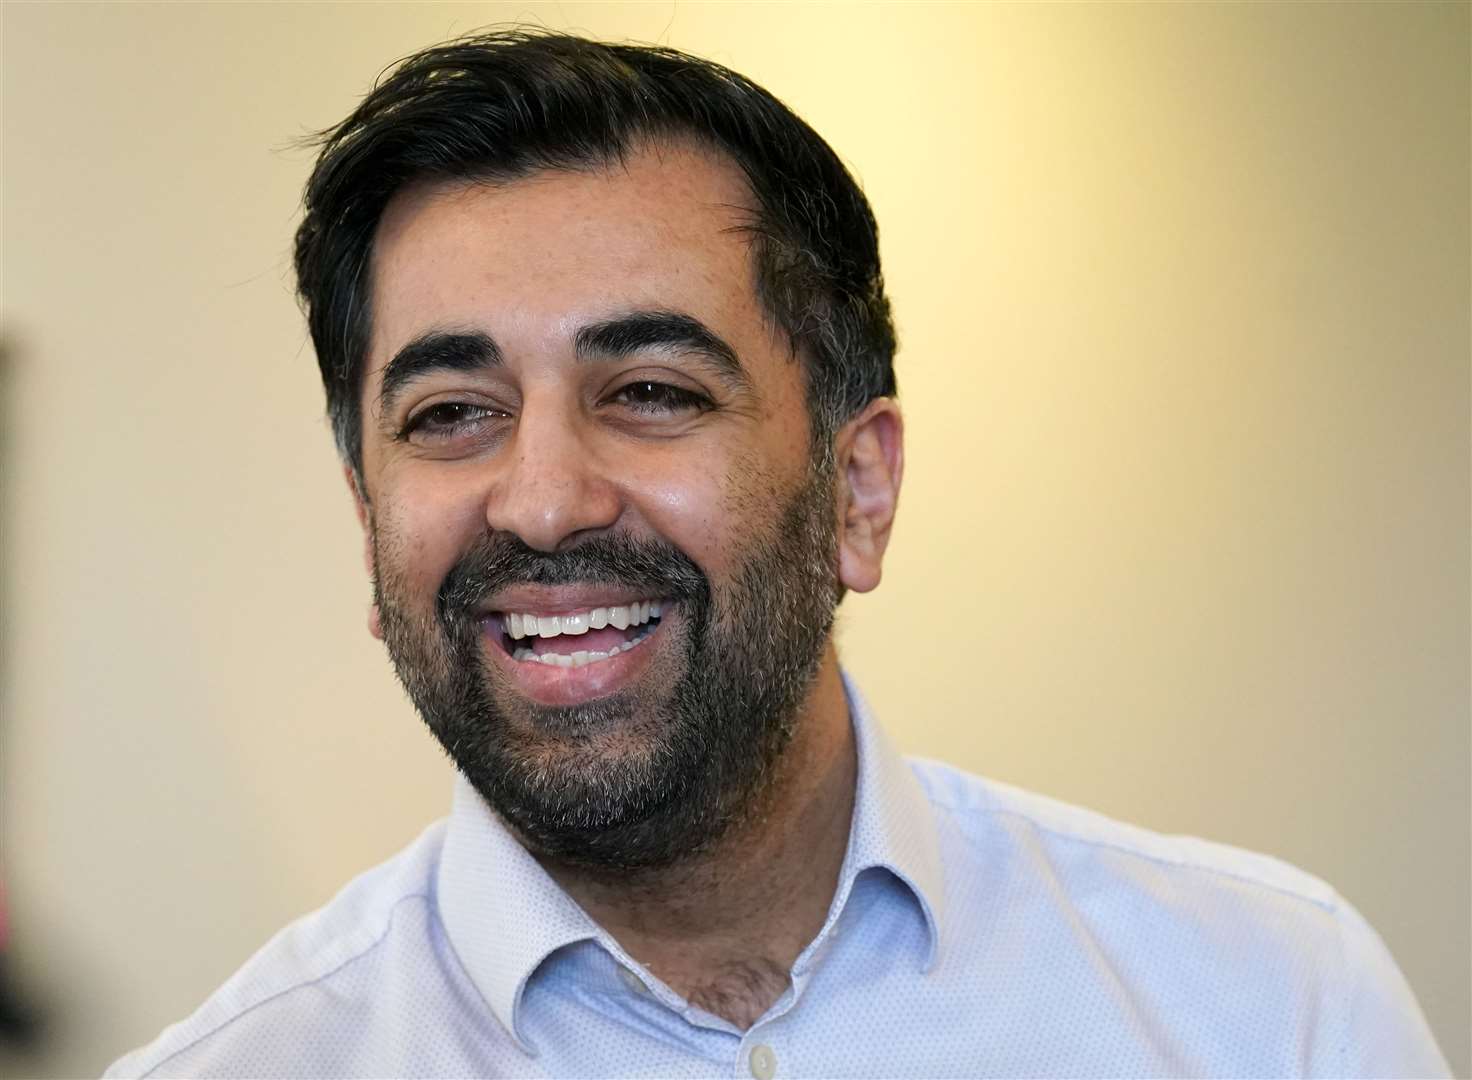 Health Secretary Humza Yousaf is running for leader (Andrew Milligan/PA)